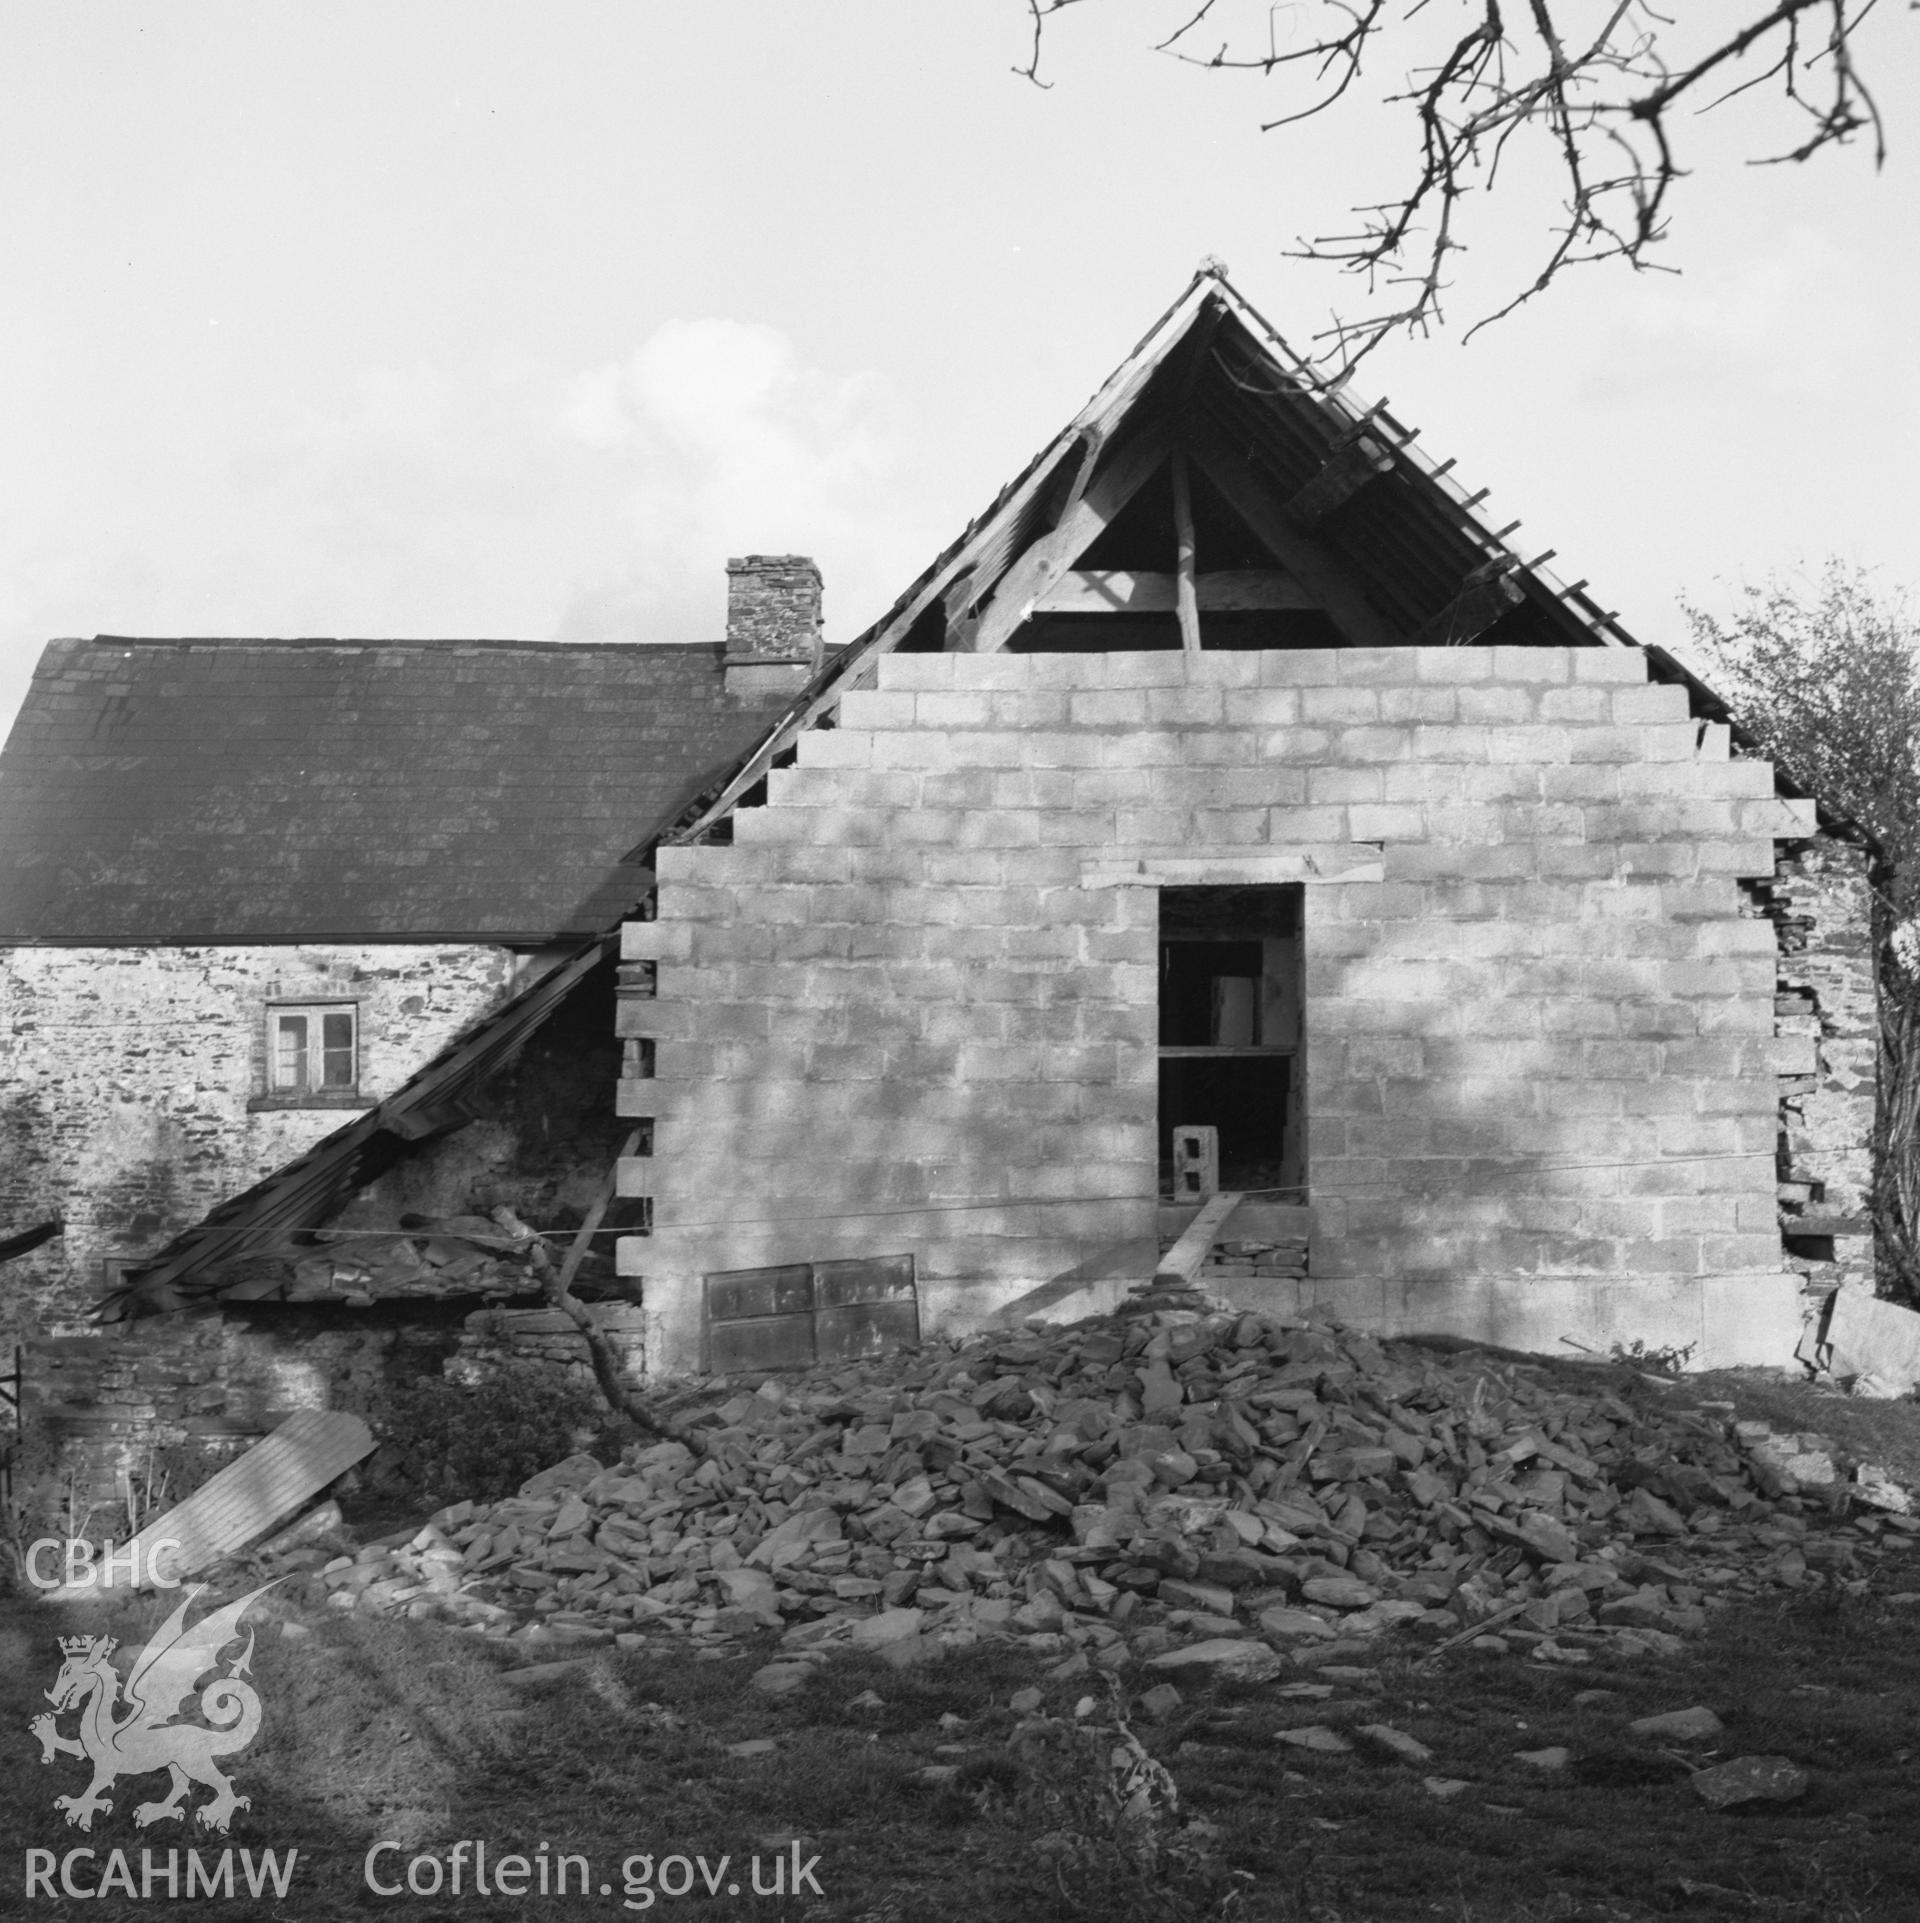 Digital copy of a black and white negative showing Tyle Coch, Bettws, taken 27th November 1965.